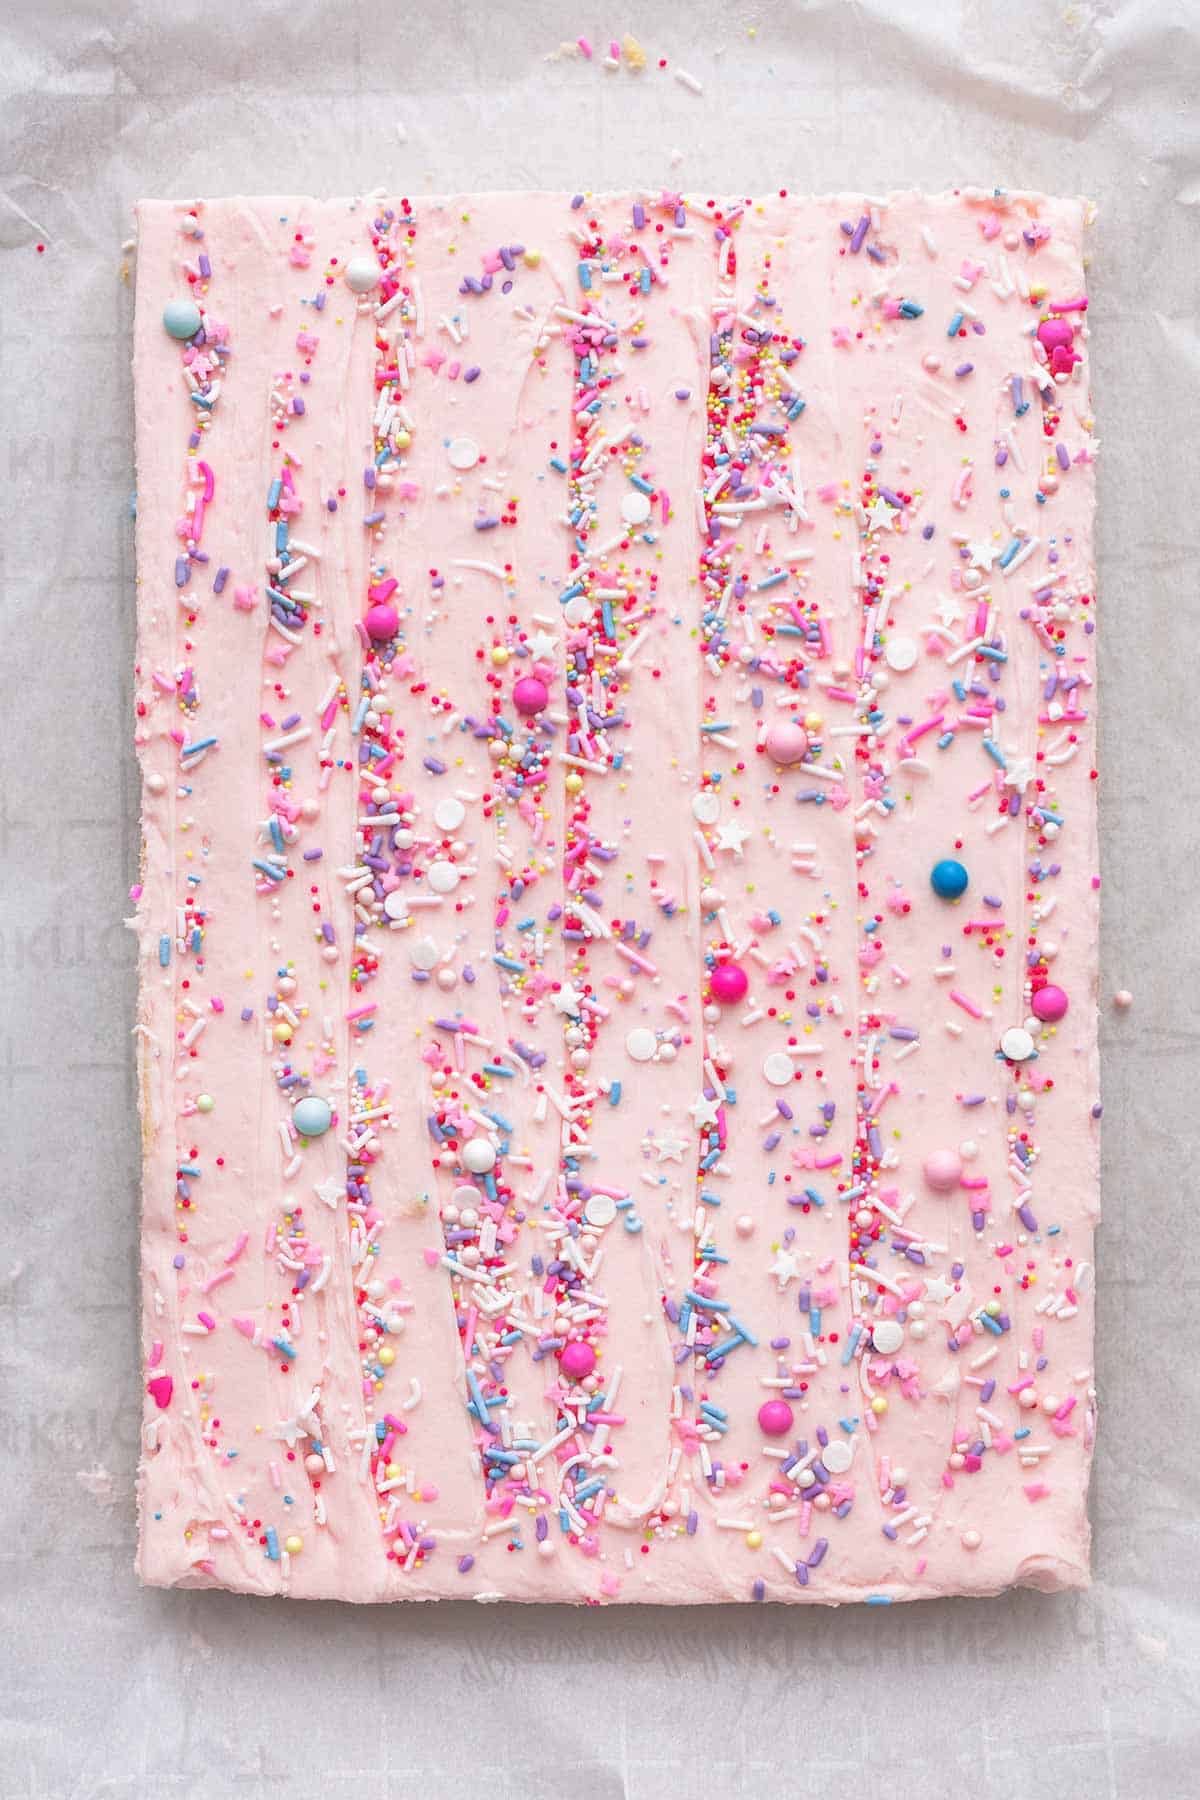 top view of frosted sugar cookie bars with sprinkles.